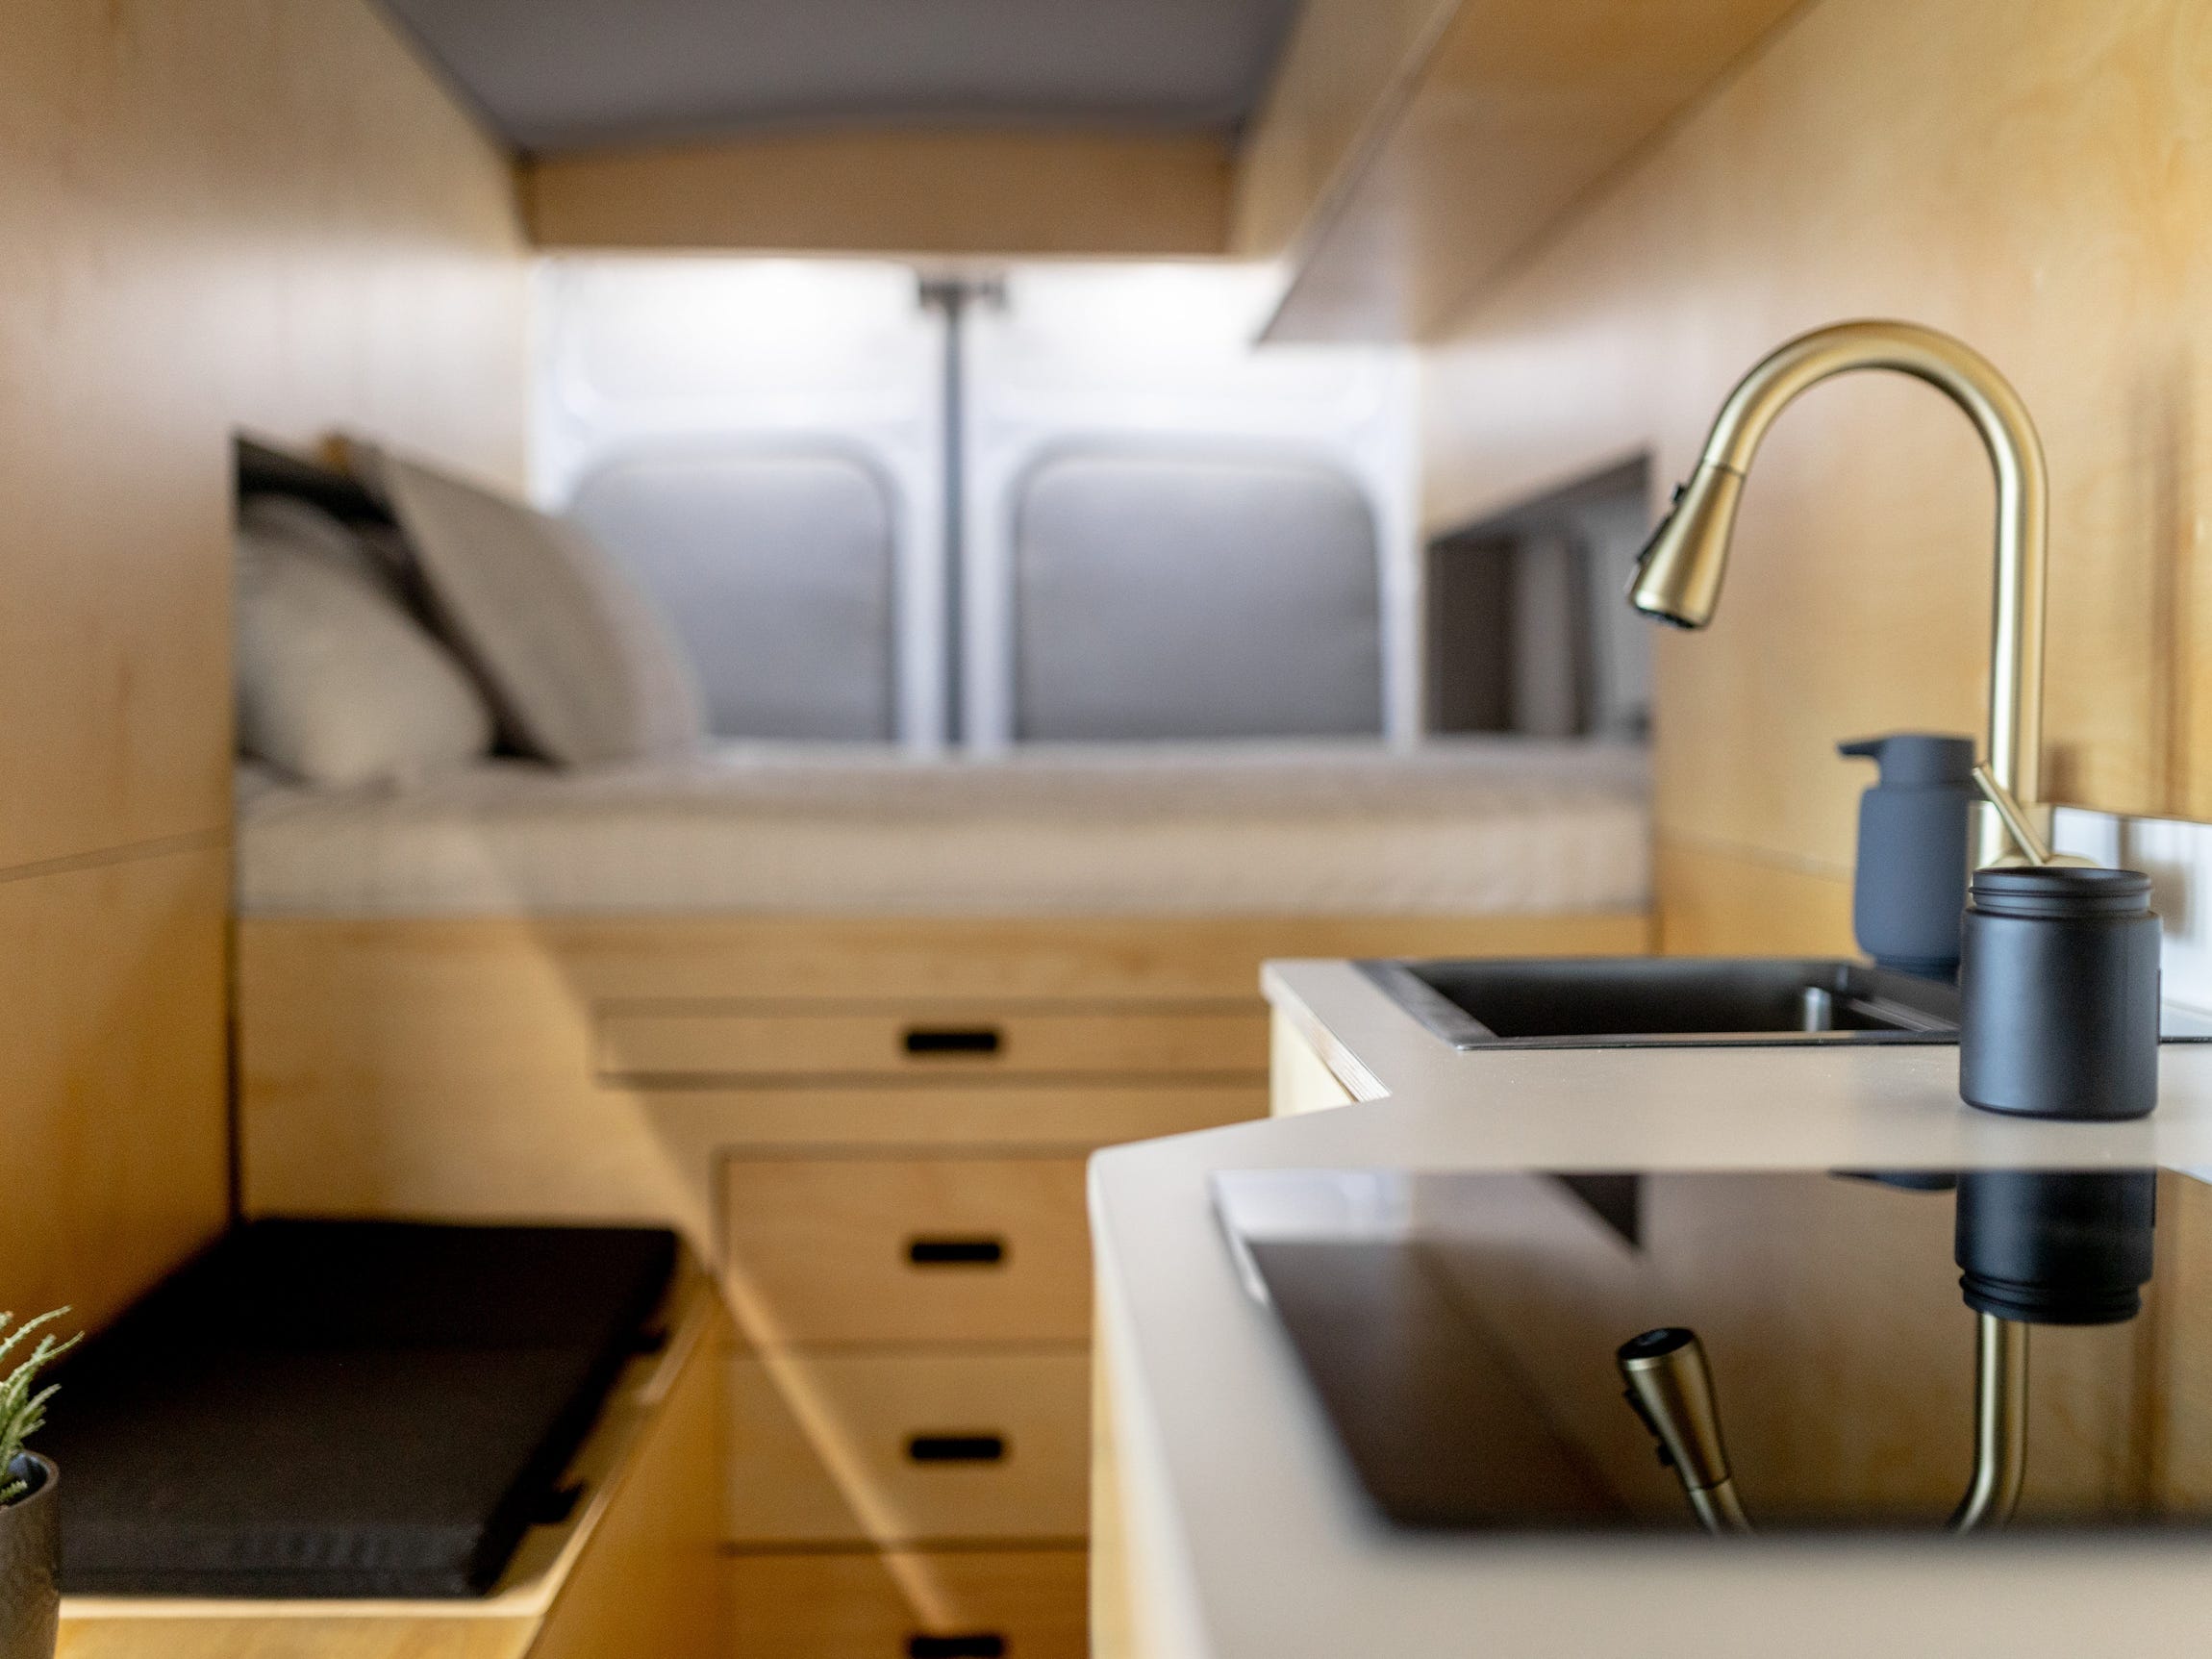 Inside Grounded's camper van with a bed, sink